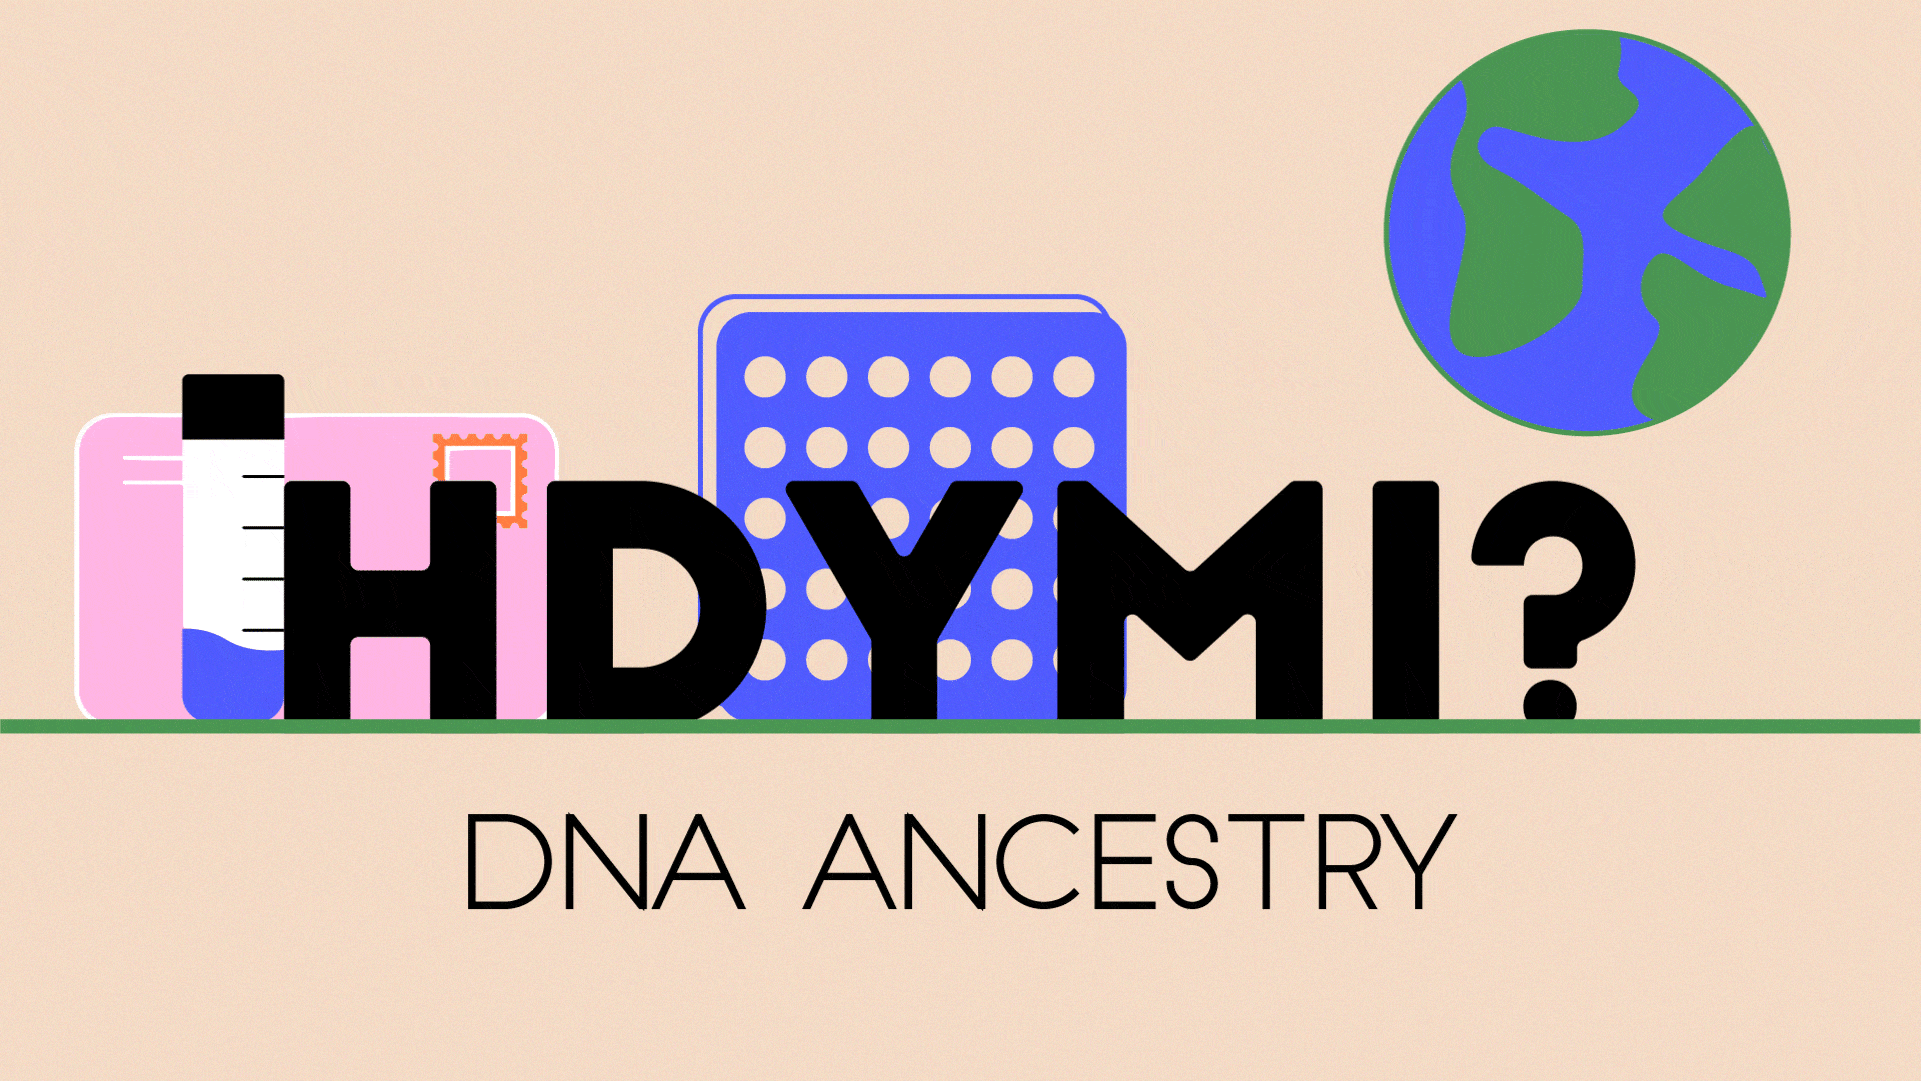 Animated image shows a test tube and an envelope moving to a grid and a DNA helix, while person markers move around on a globe appear over the words "HDYMI? DNA ANCESTRY."